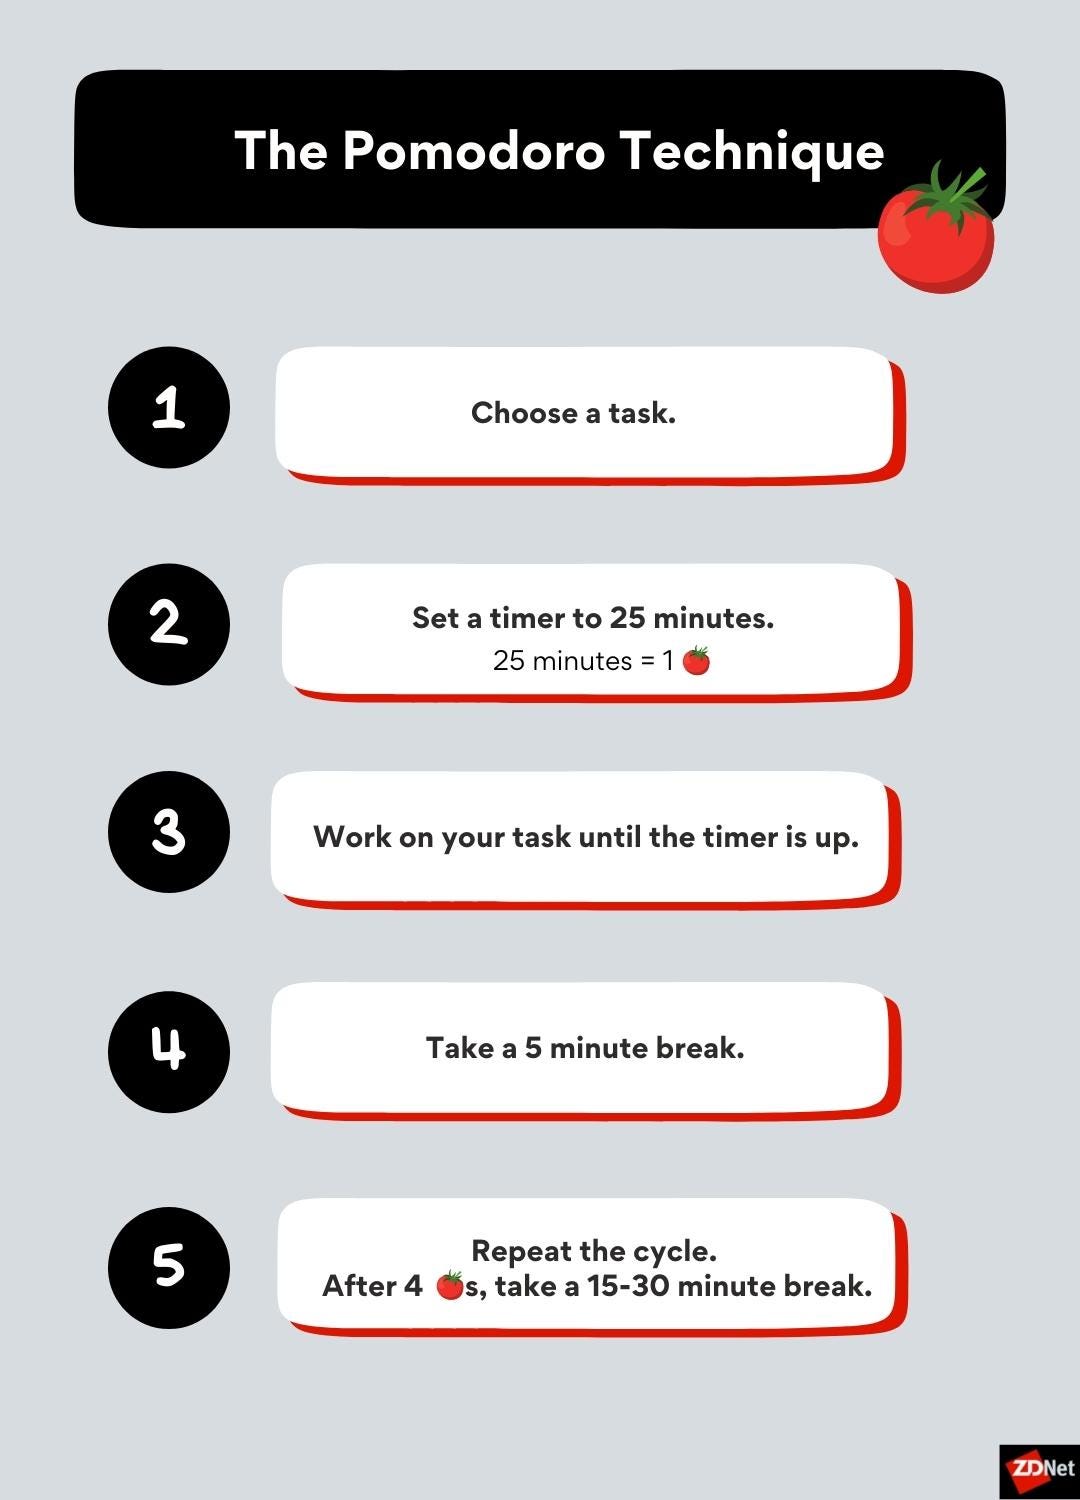 Five steps to the Pomodoro Technique: Choose a task, set a timer to 25 minutes (which equals one pomodoro), work on your task until the timer is up, take a five minute break, and then repeat the cycle. Take a 15-30 minute break after four pomodoros.